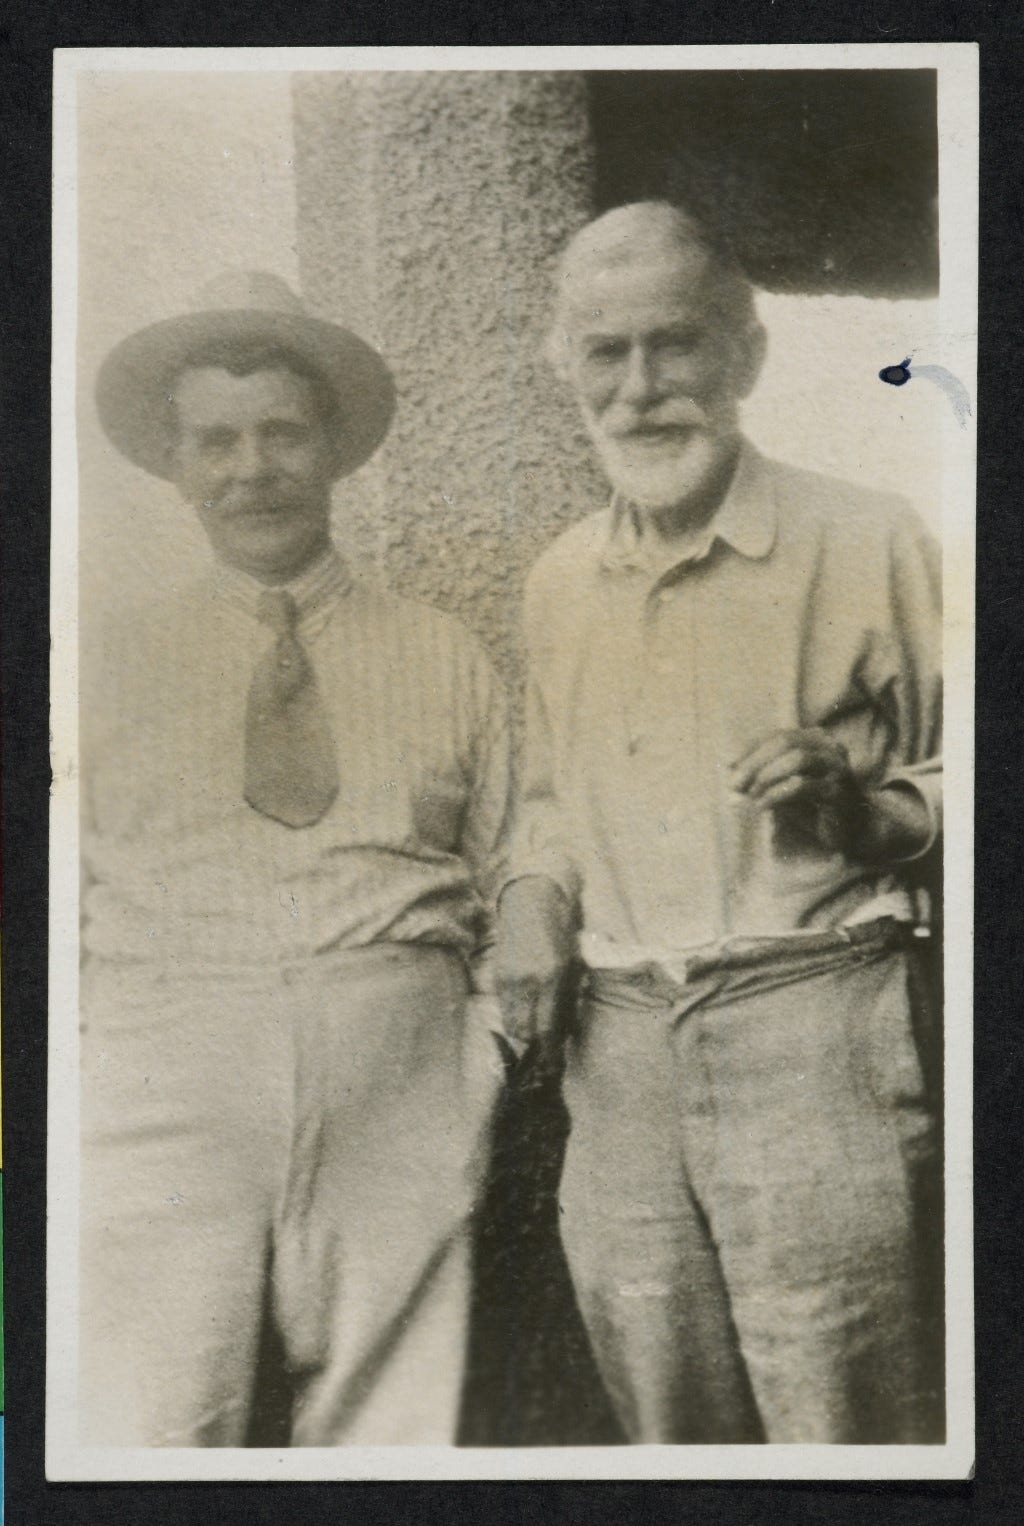 Three quarter length shot of George Merrill and Edward Carpenter, early 1900s